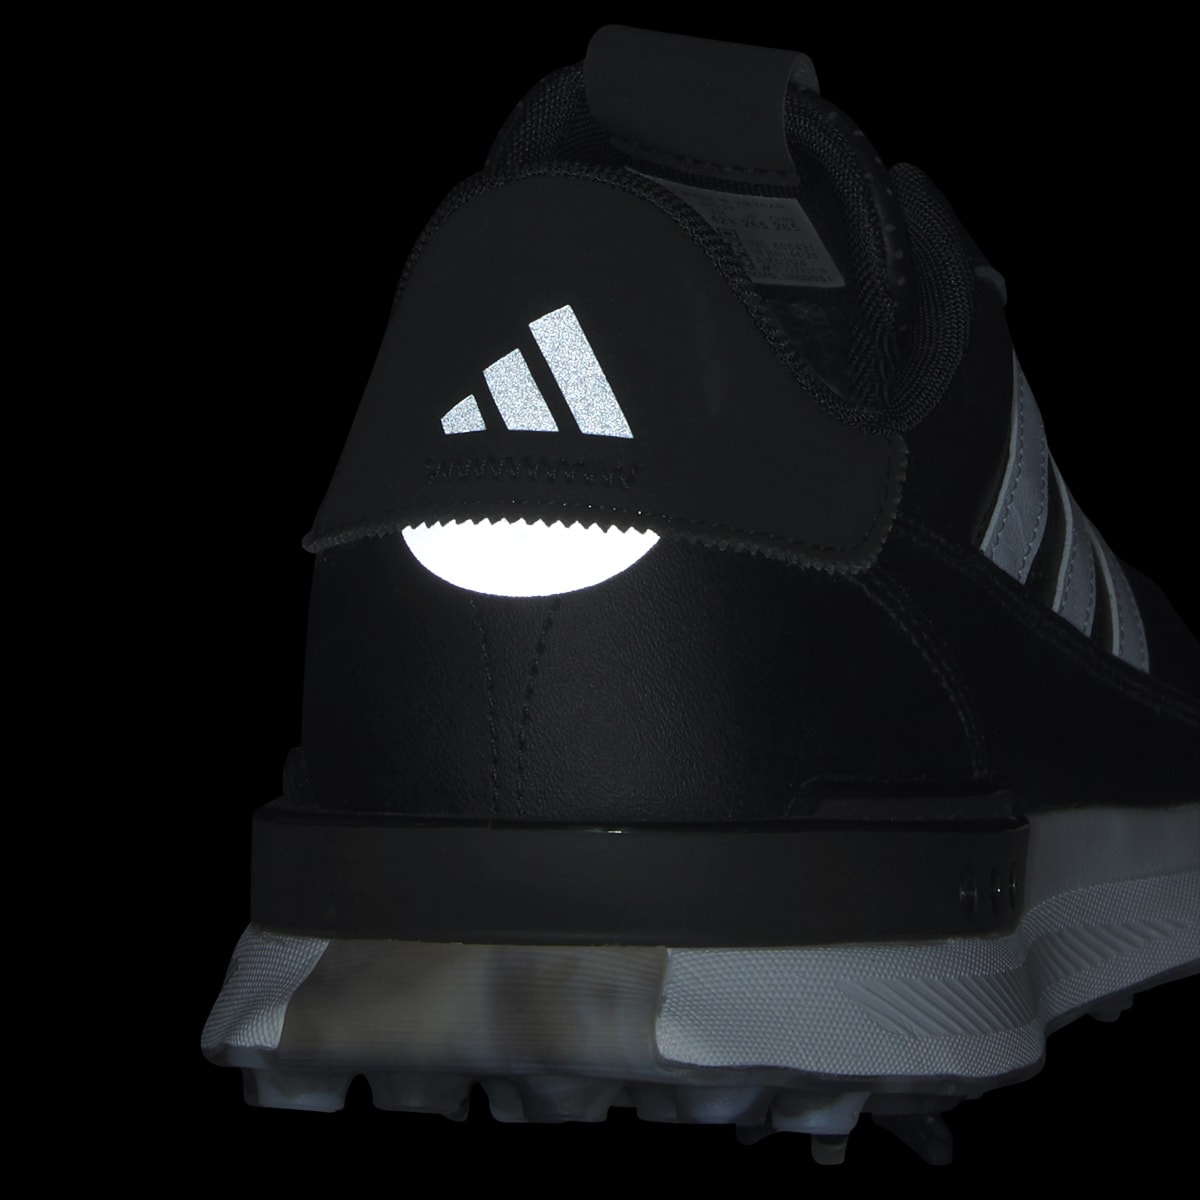 Adidas S2G 24 Golf Shoes. 12